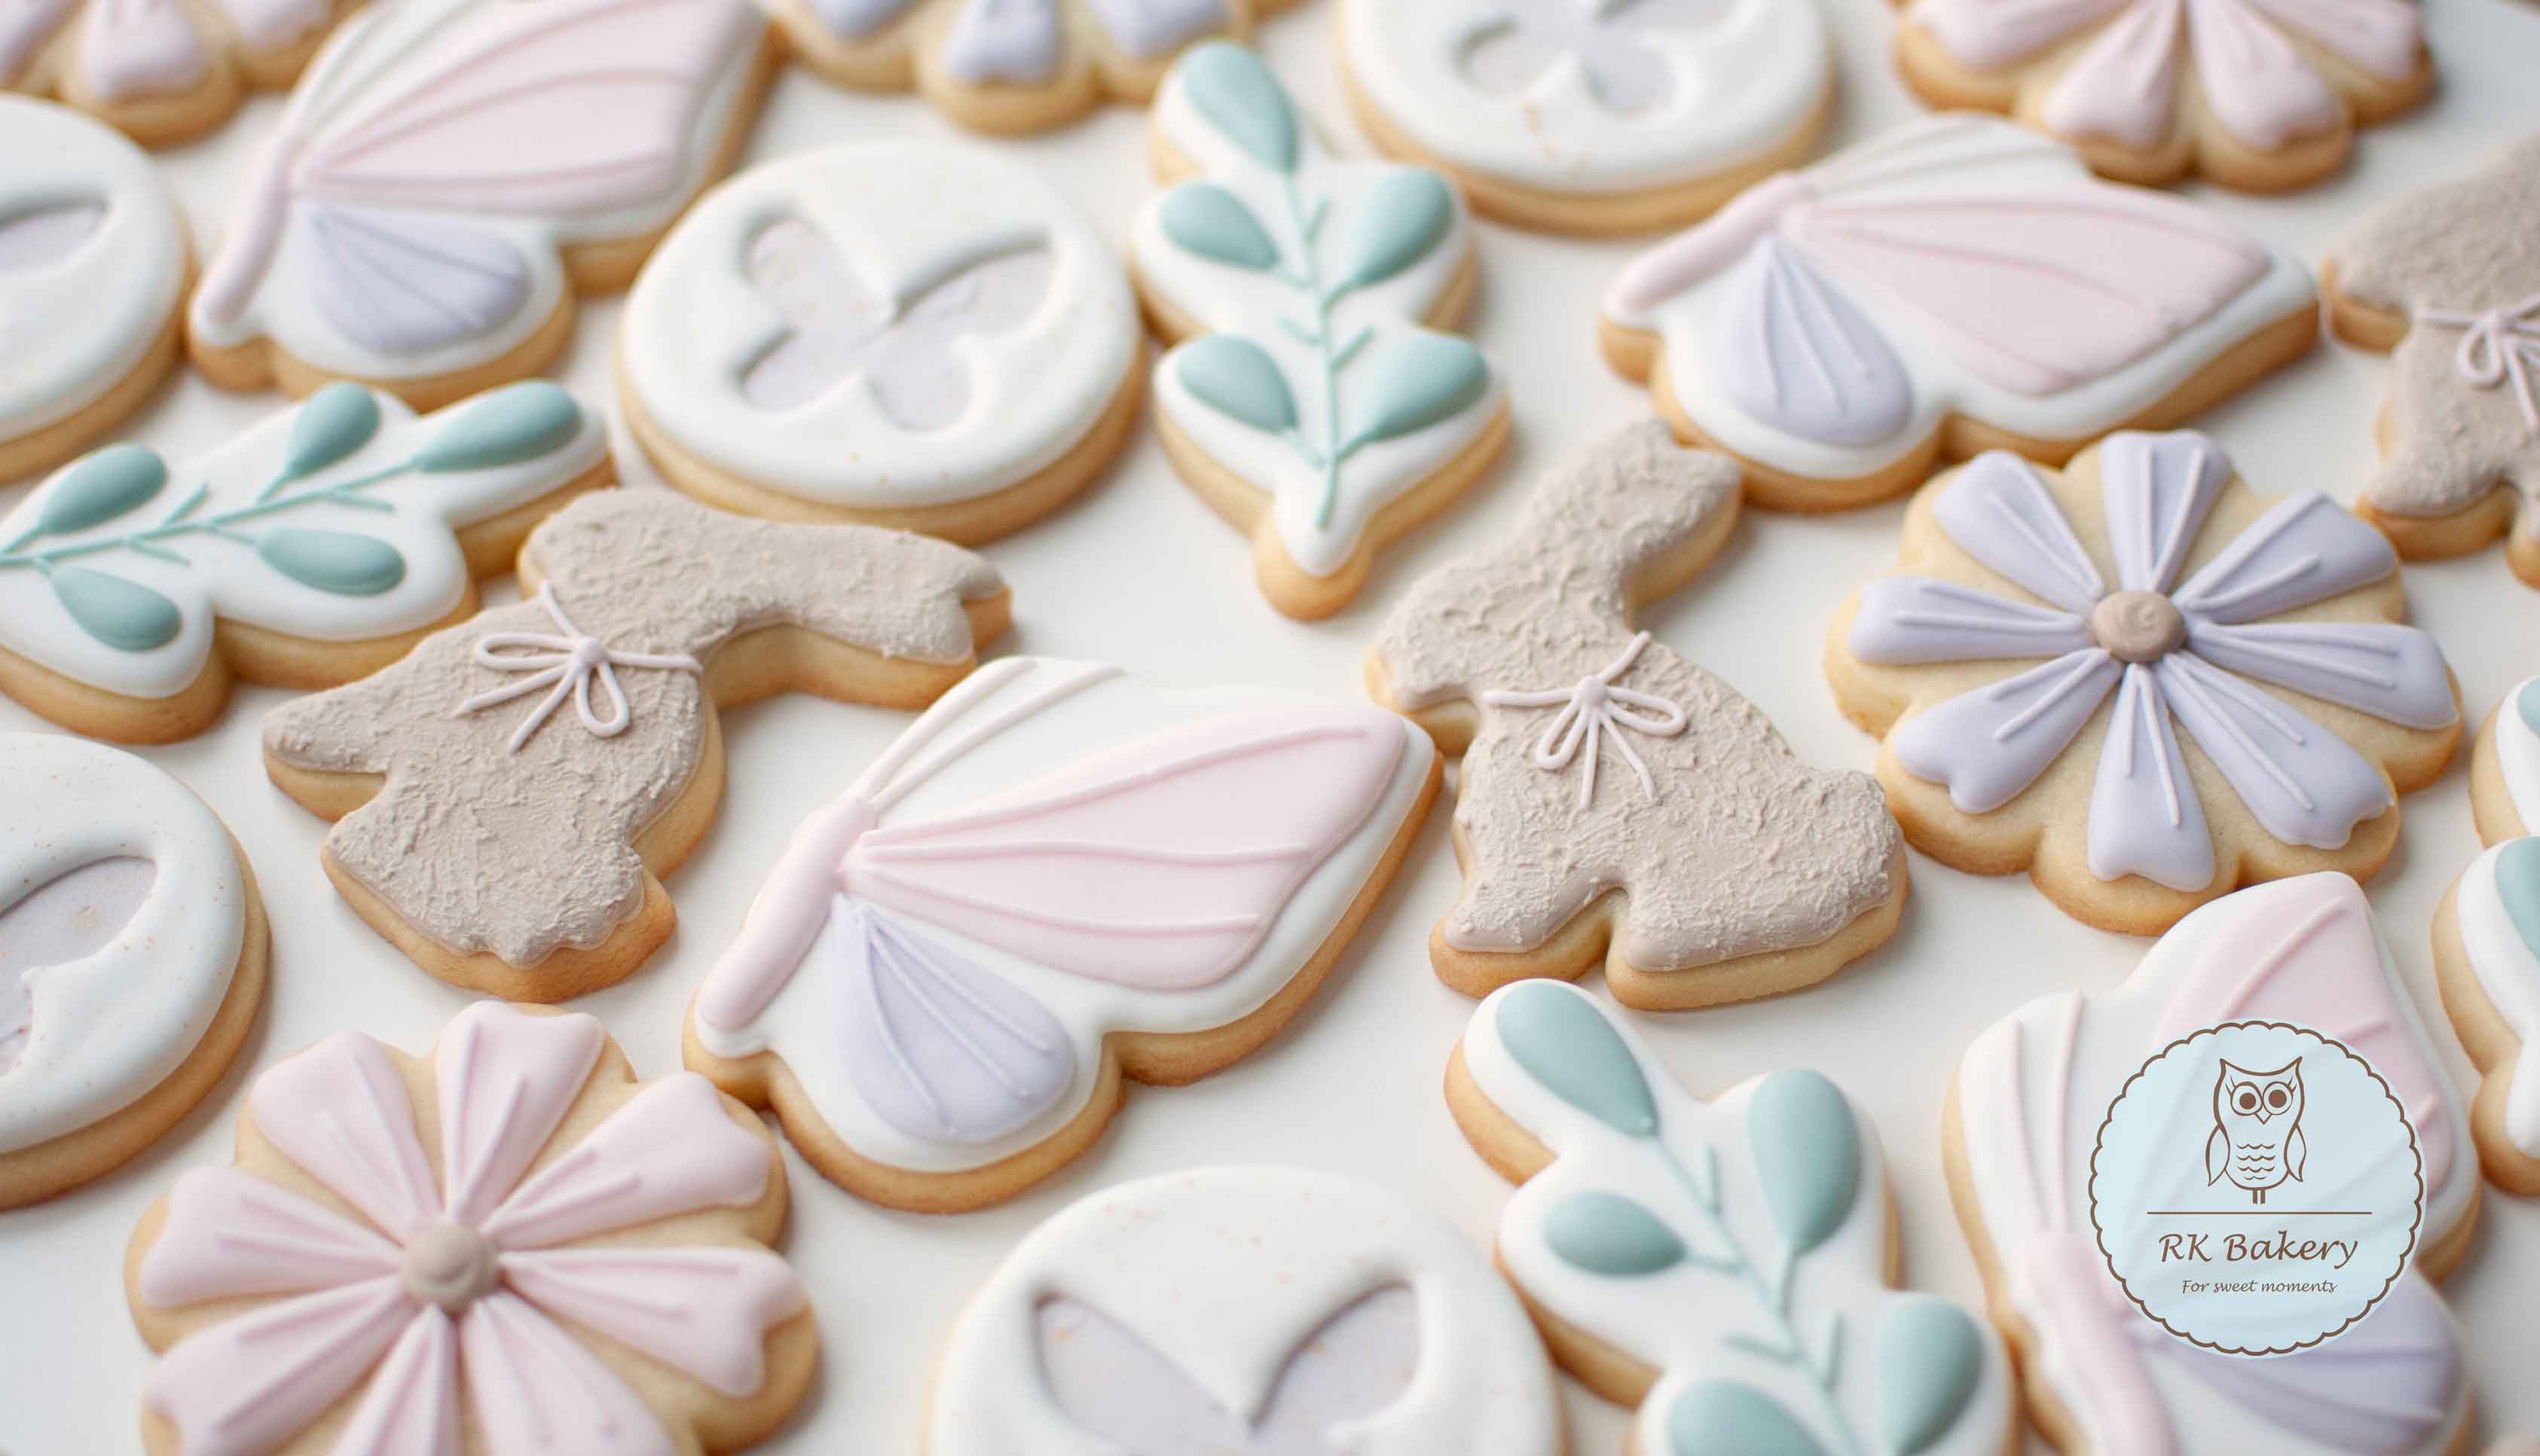 Enchanted forest themed cookies